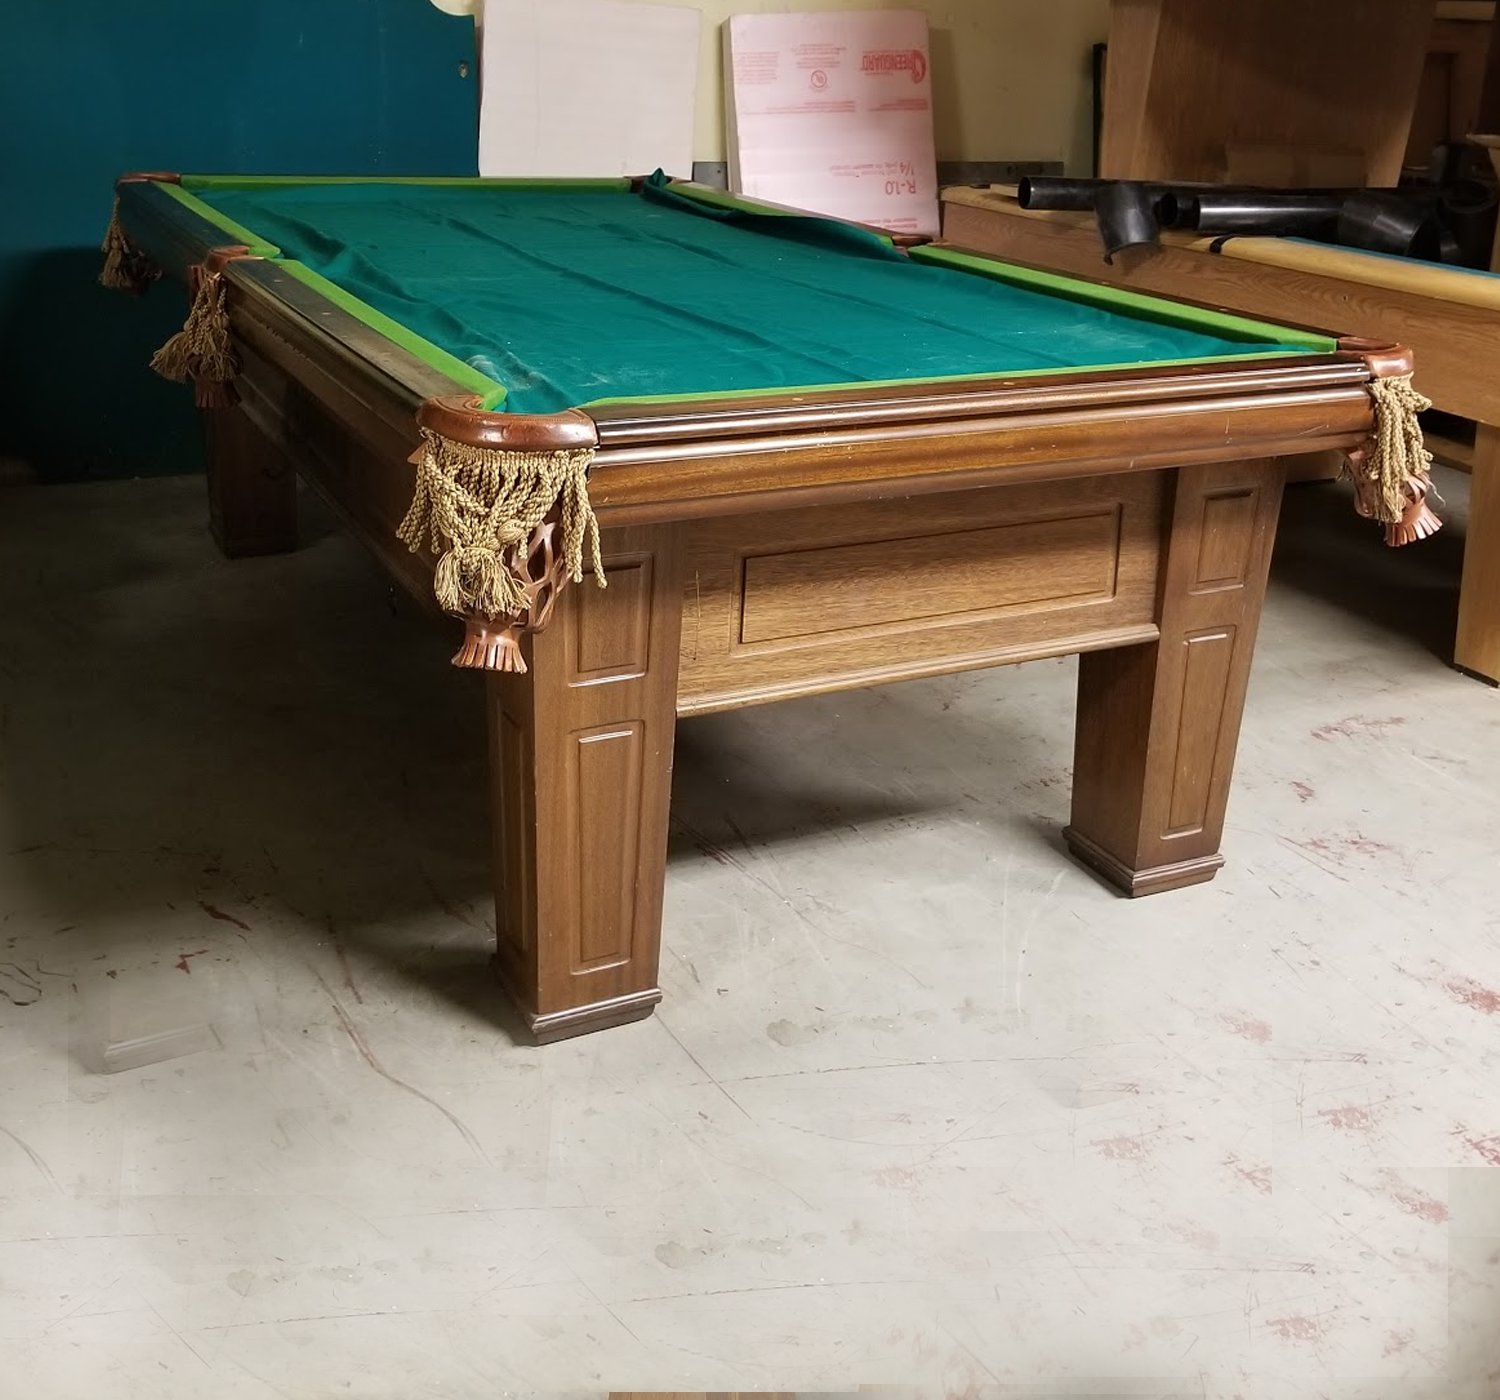 Pre Owned Pool Tables Game Room Furniture